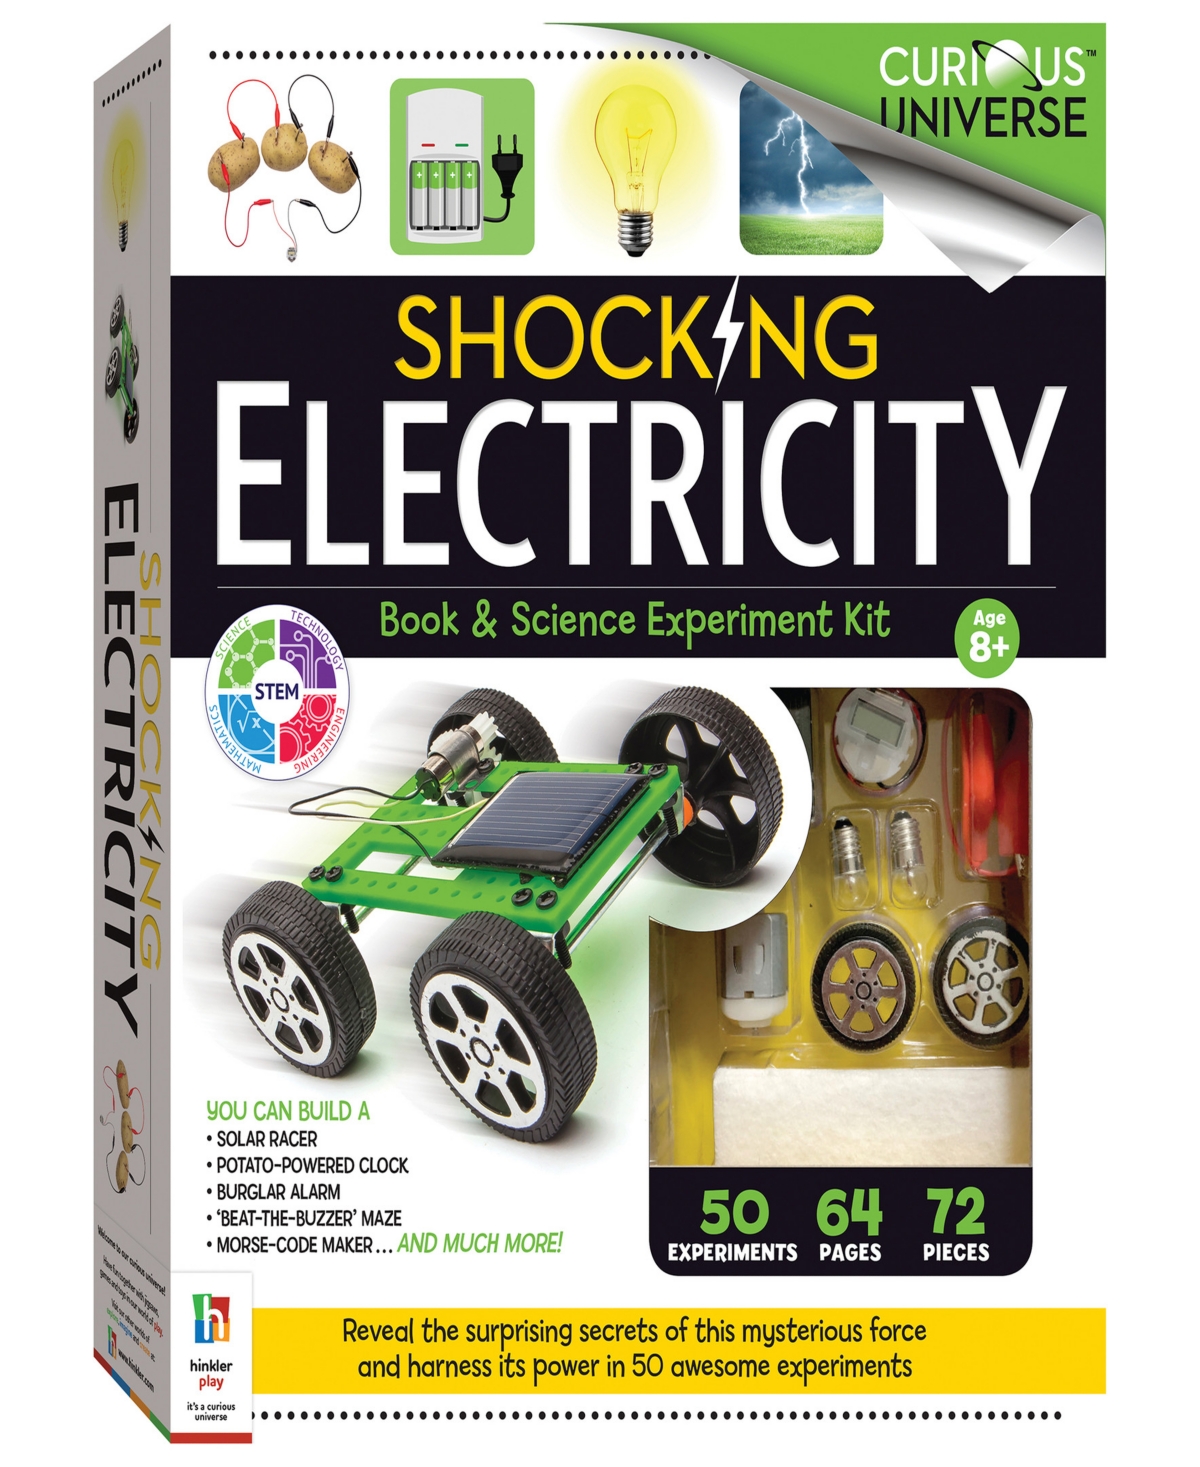 Curious Universe Shocking Electricity Science Kit 50 Science Experiments With 70 Piece Kit Diy Science For Kids, Crea In Multi